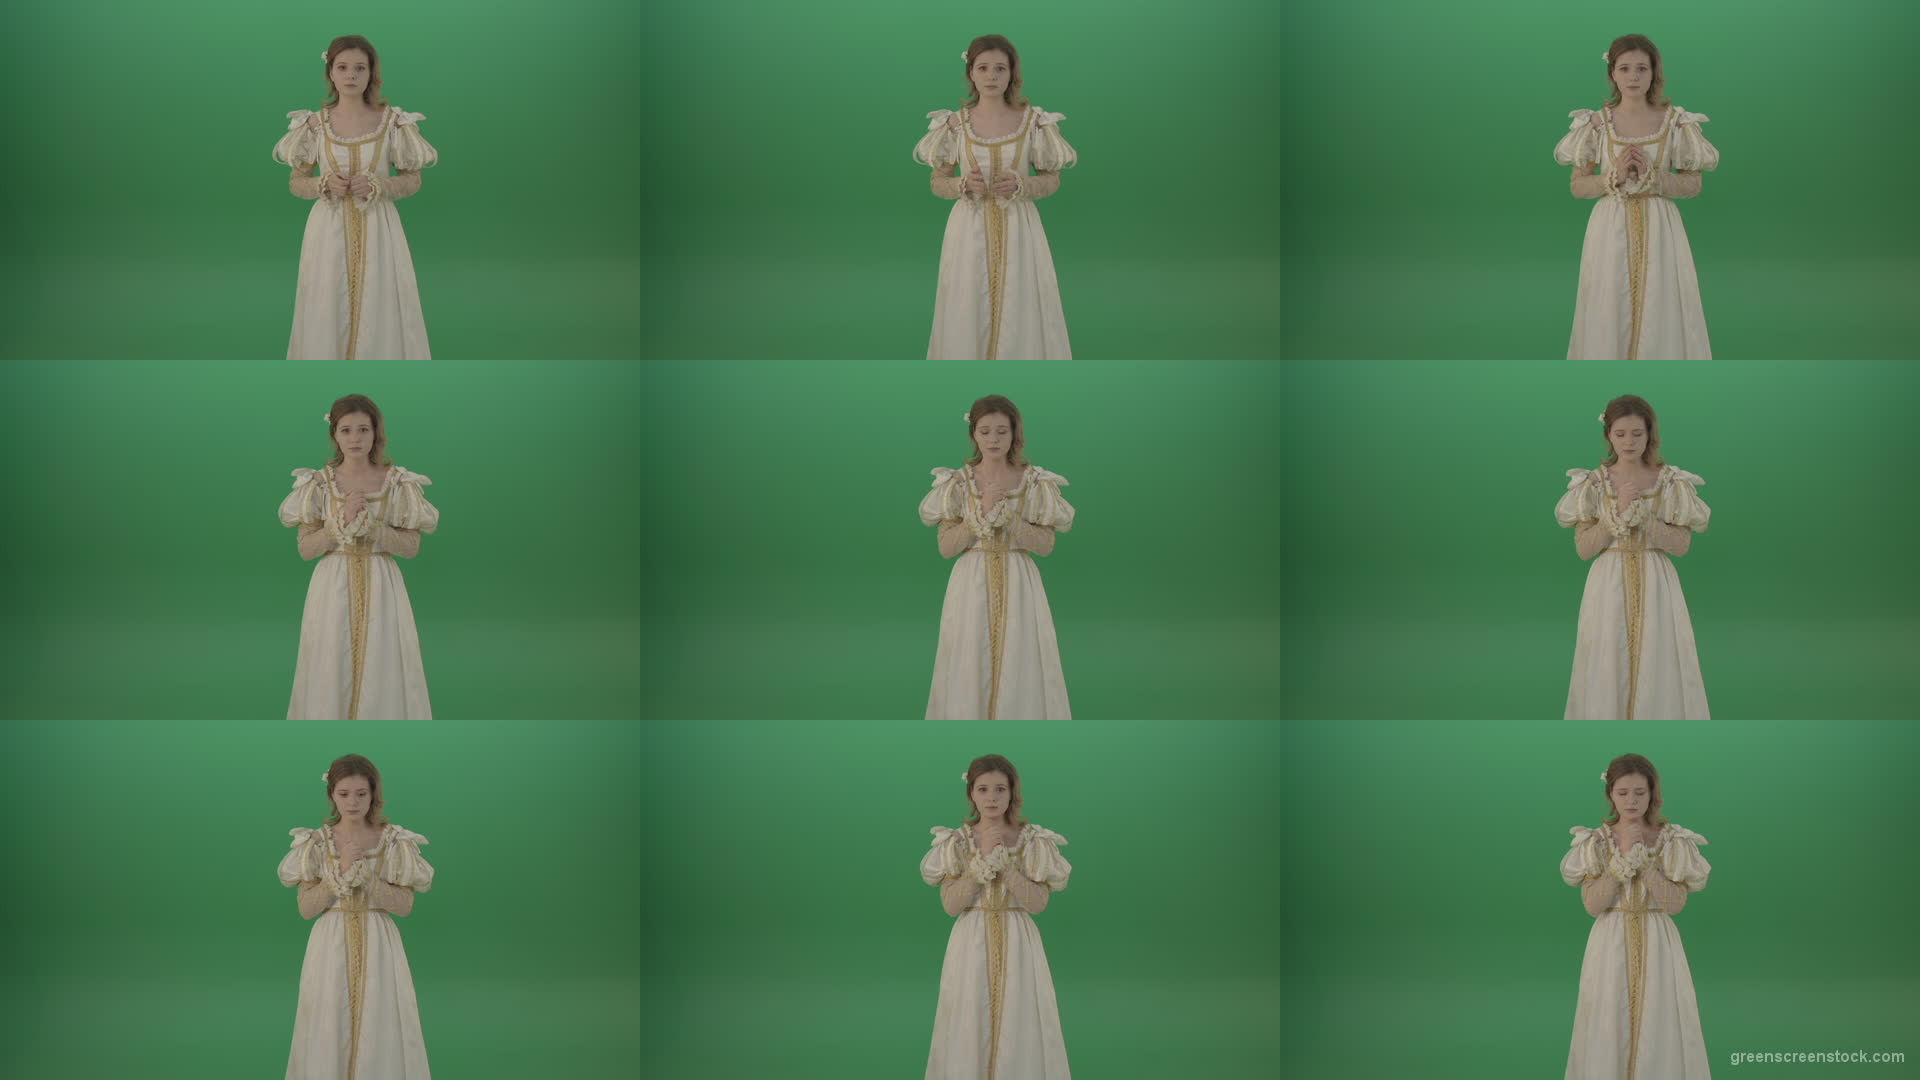 Hopes-for-victory-and-sincerely-believes-the-girl-to-show-emotions-isolated-on-green-background Green Screen Stock